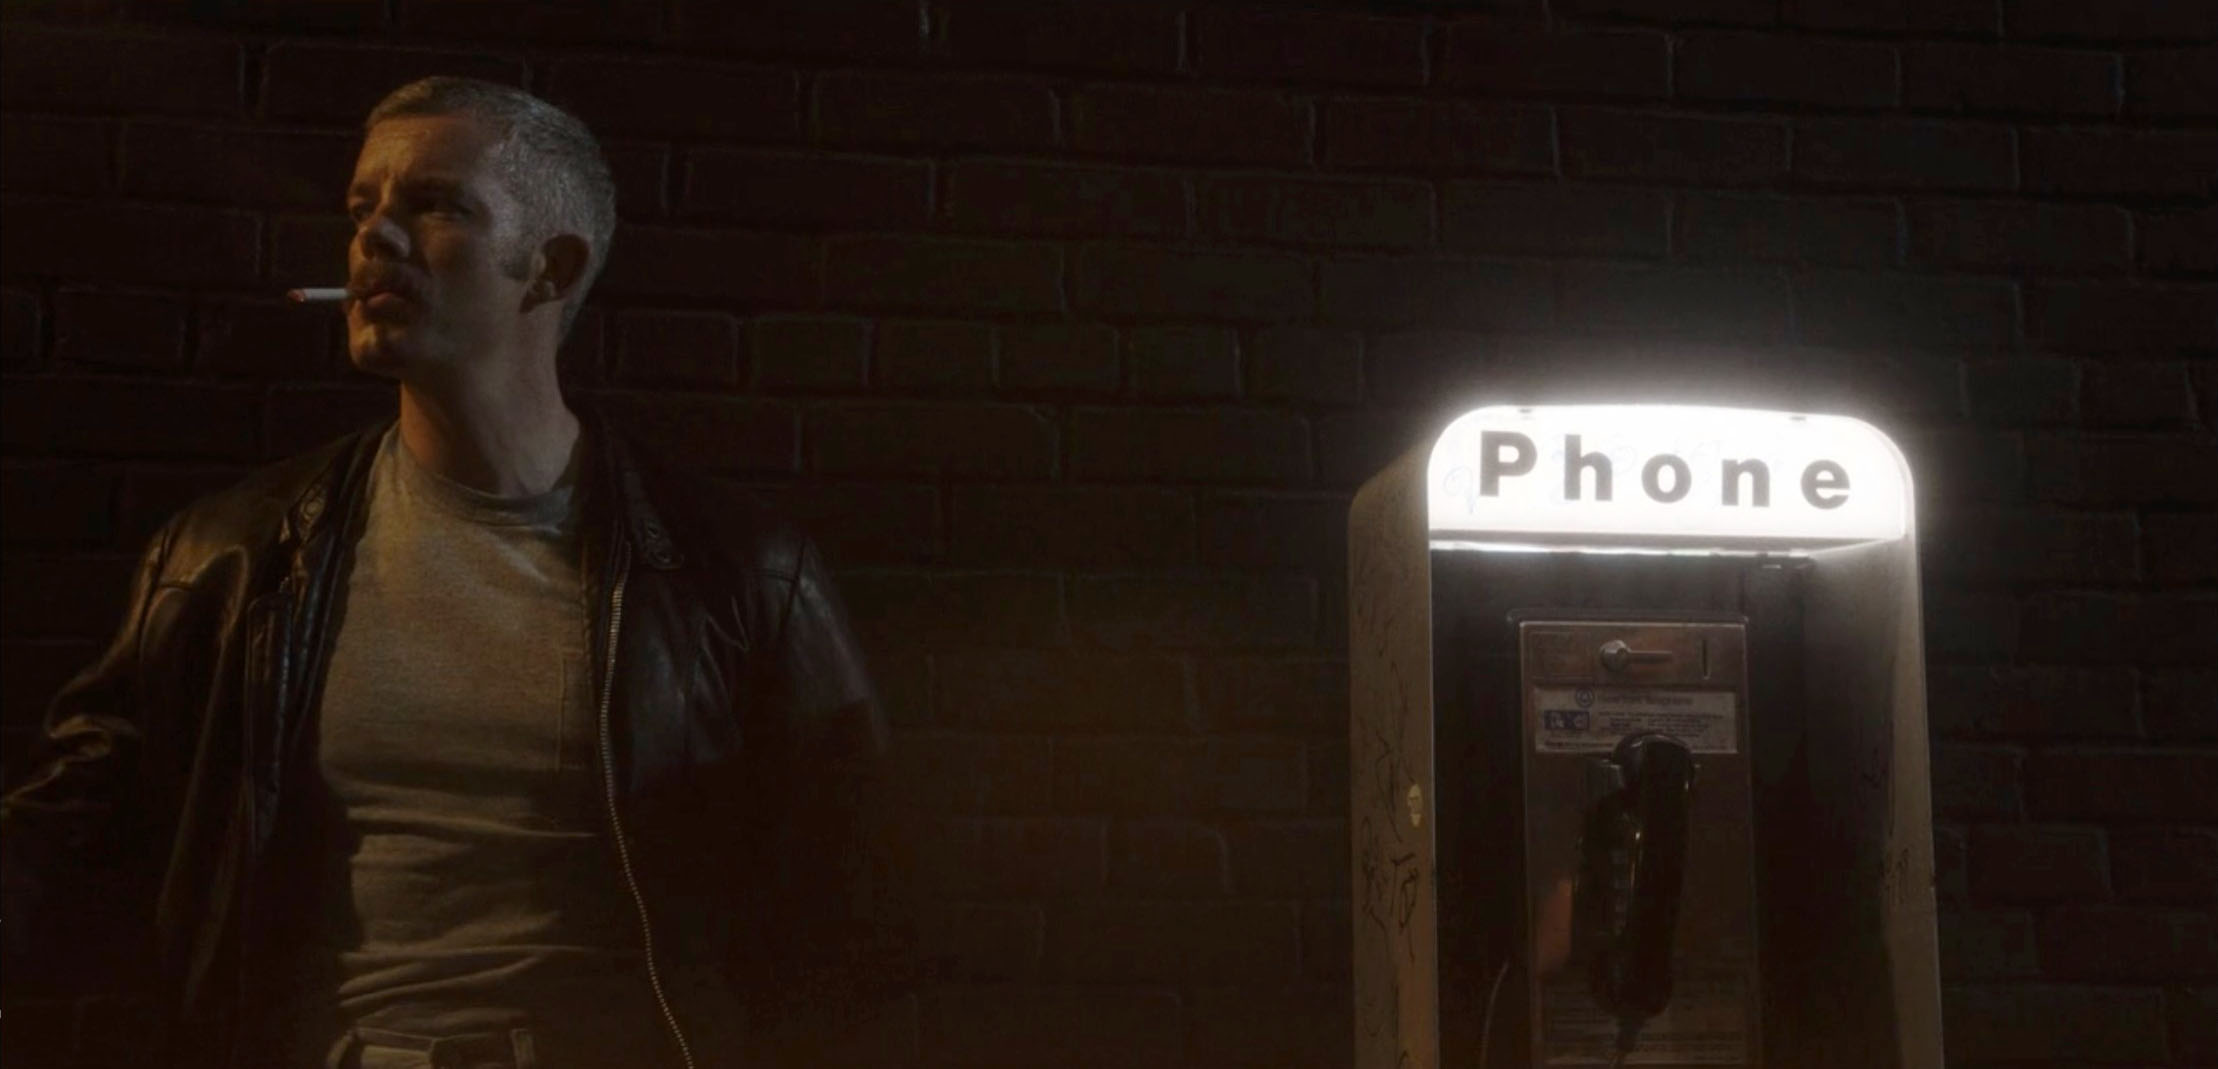 A man in a leather jacket smoking a cigarette next to a pay phone.